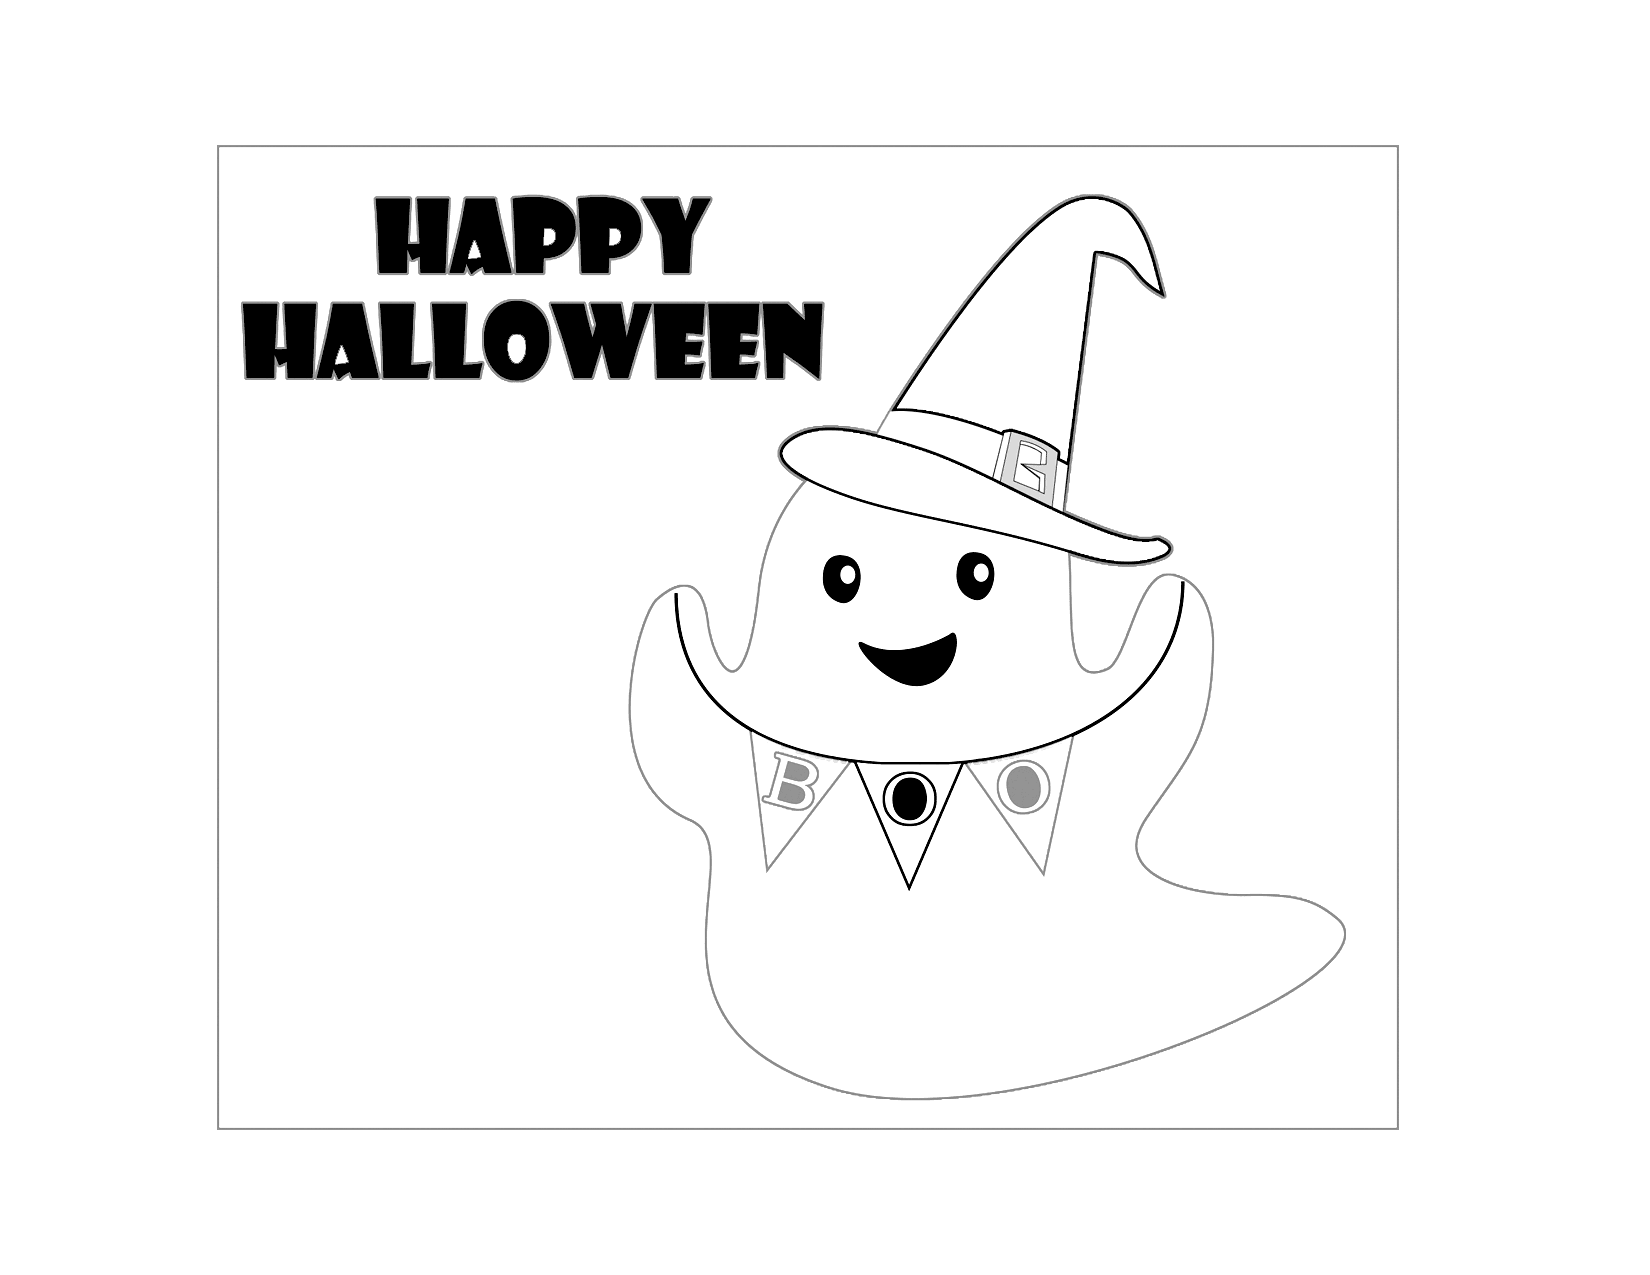 Happy Halloween Ghost Coloring Page